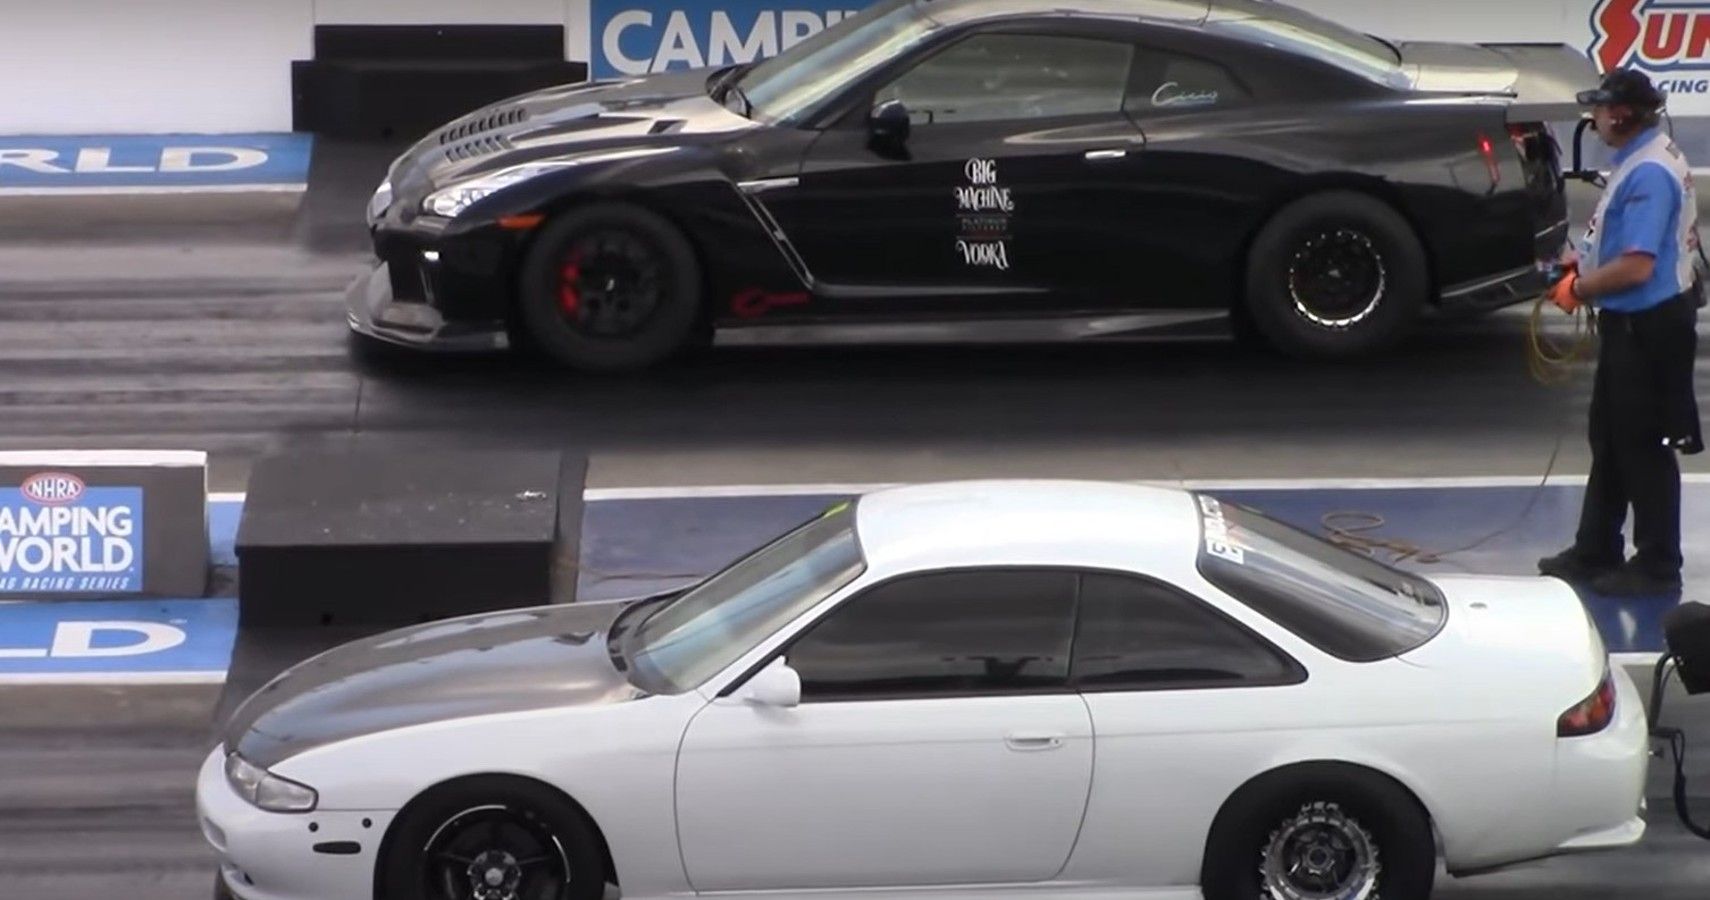 2JZ swapped Nissan 240SX and Nissan GTR drag racing